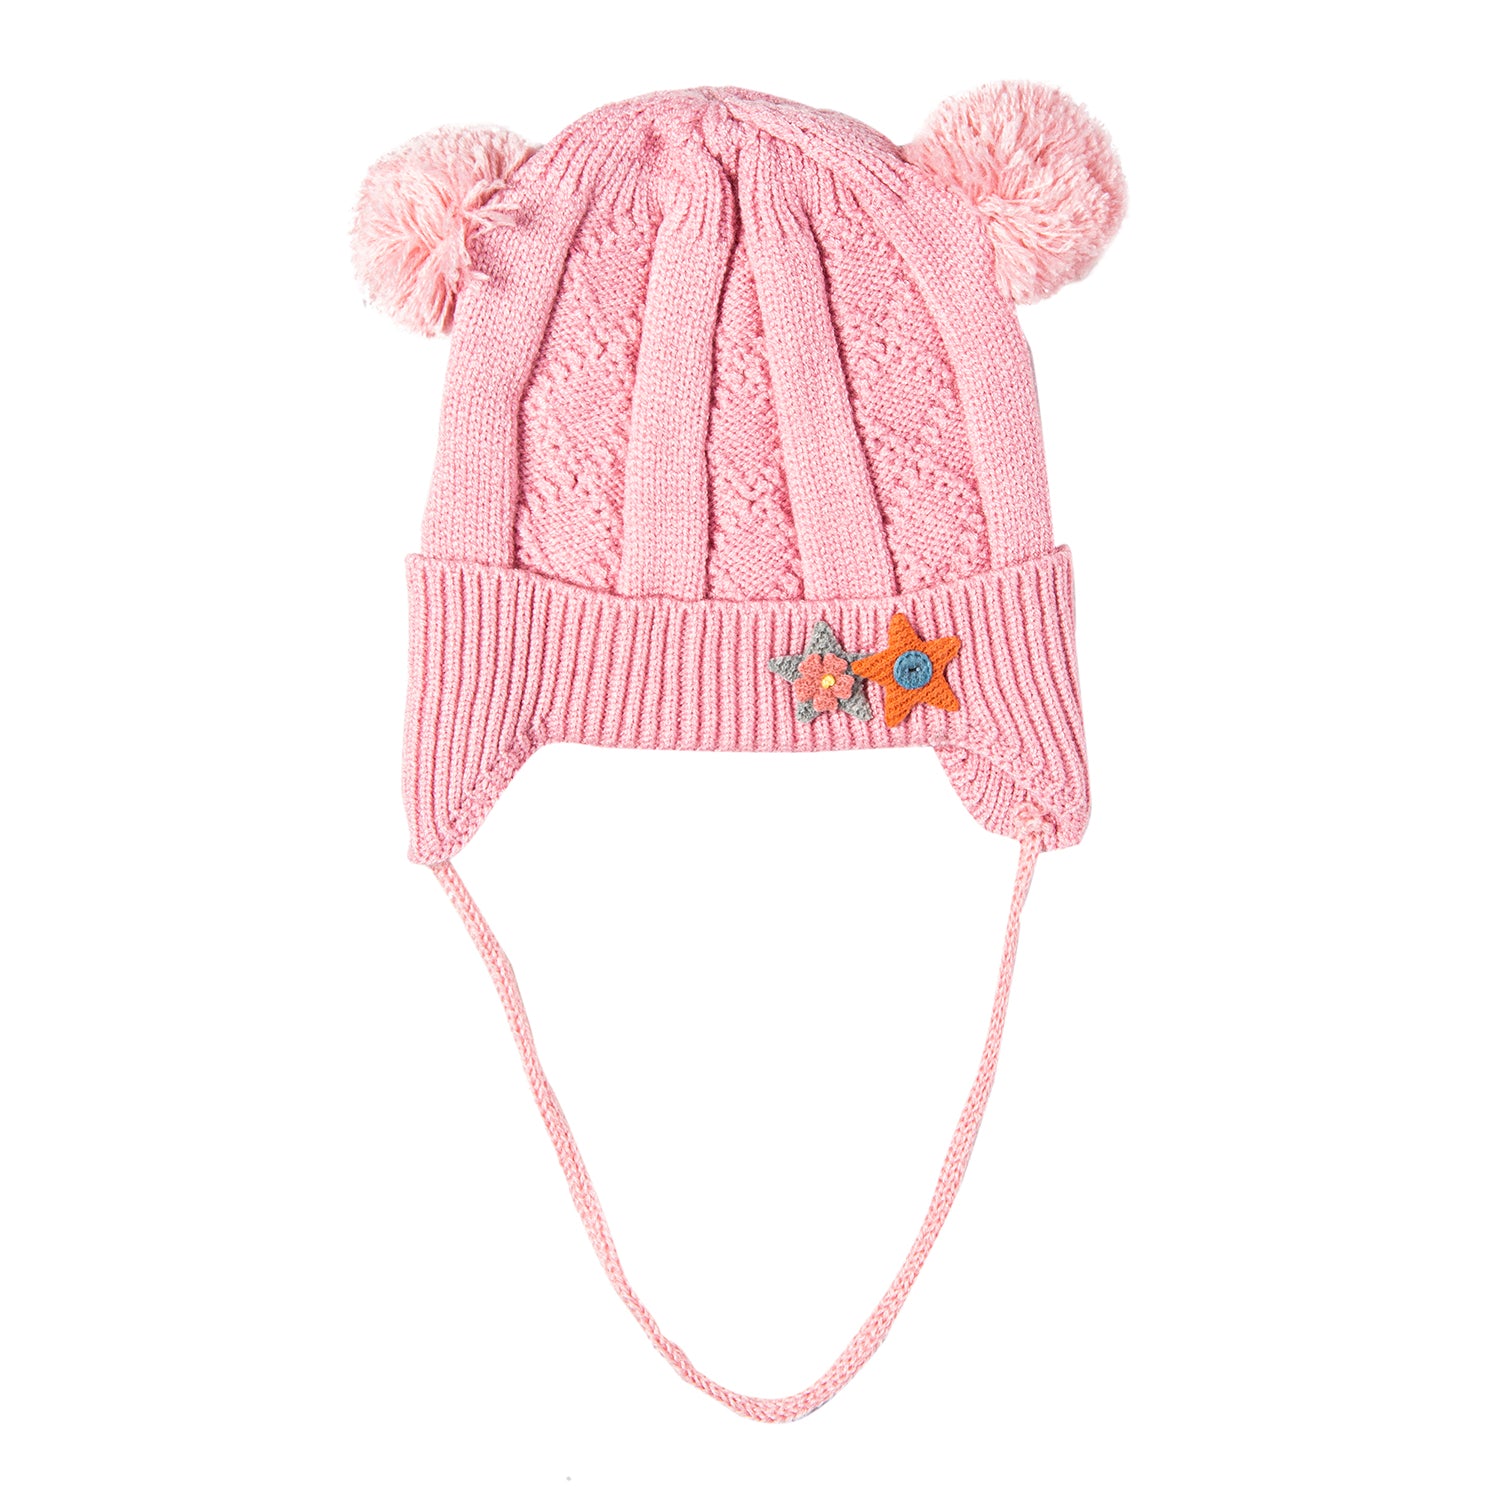 Knit Woollen Cap With Tie For Ear Cover Starry Pom Pom Pink